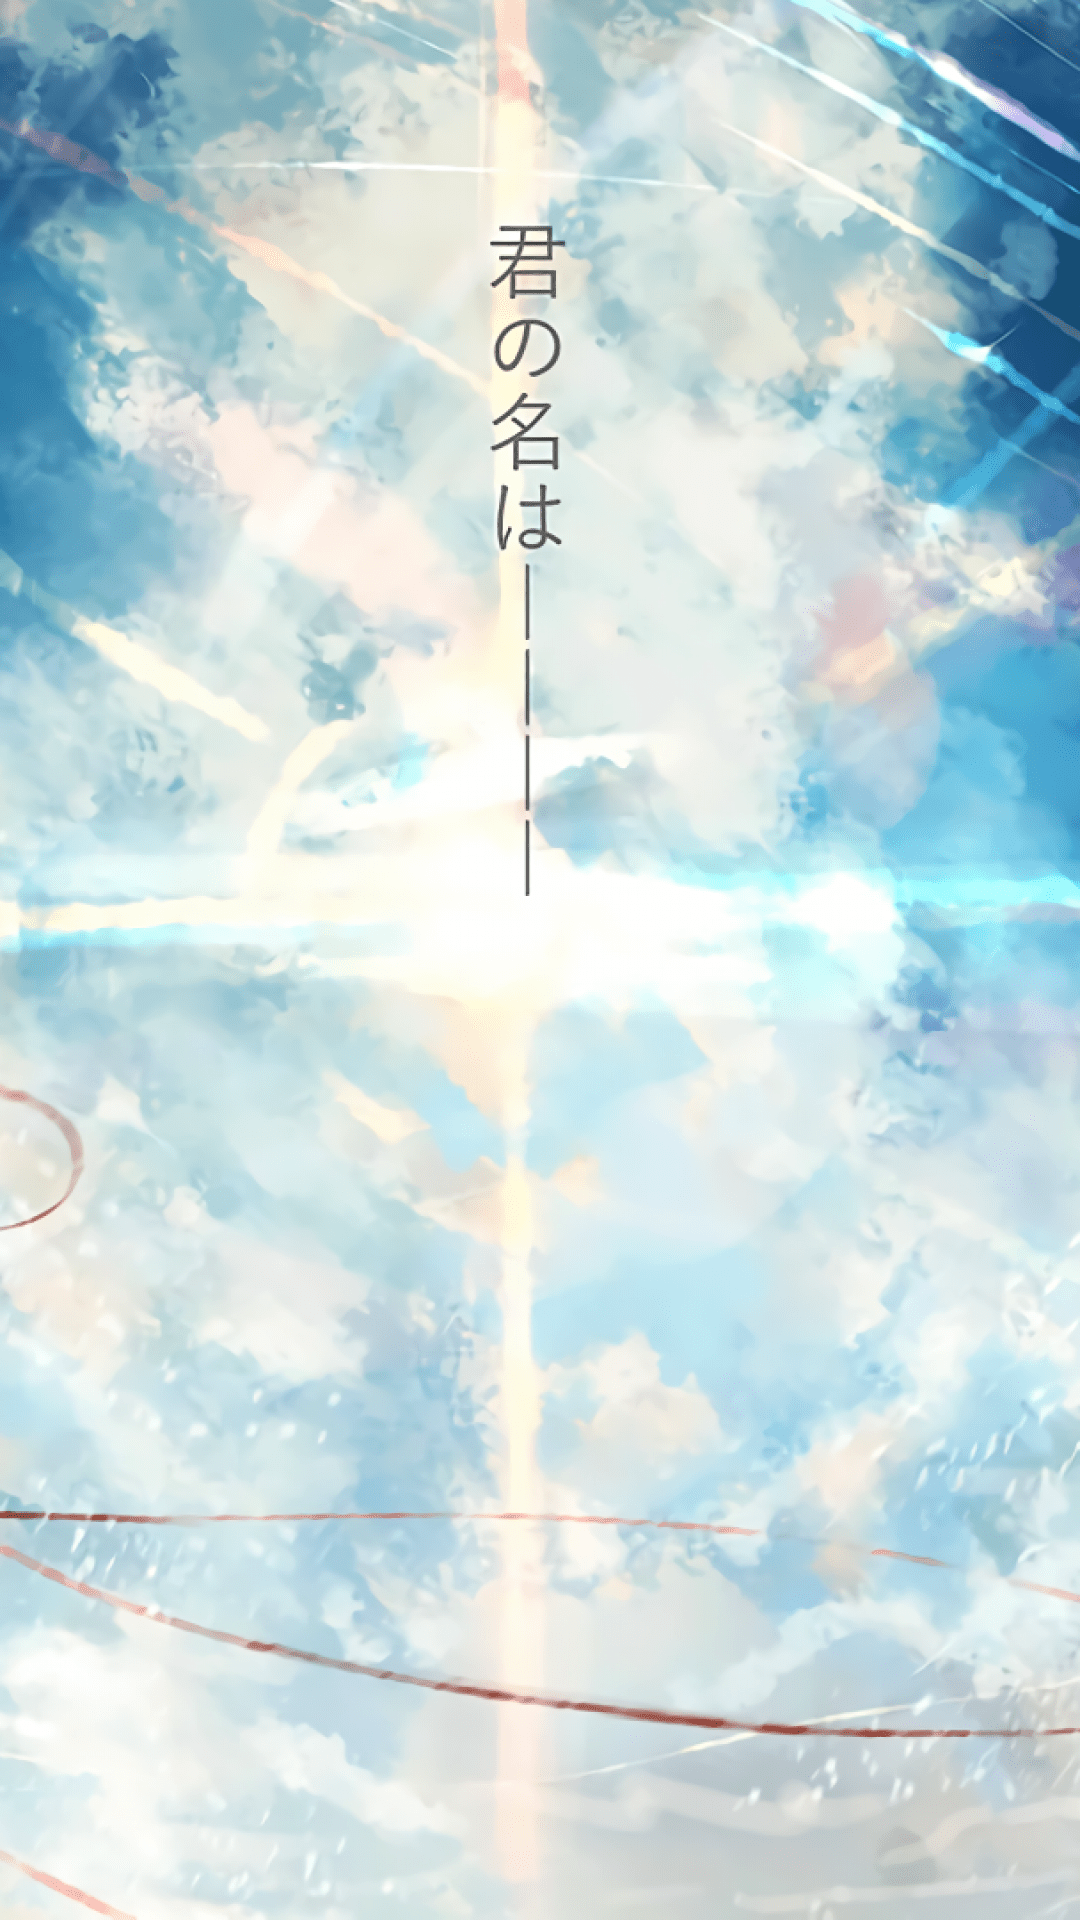 14 Your Name Anime Wallpaper Iphone